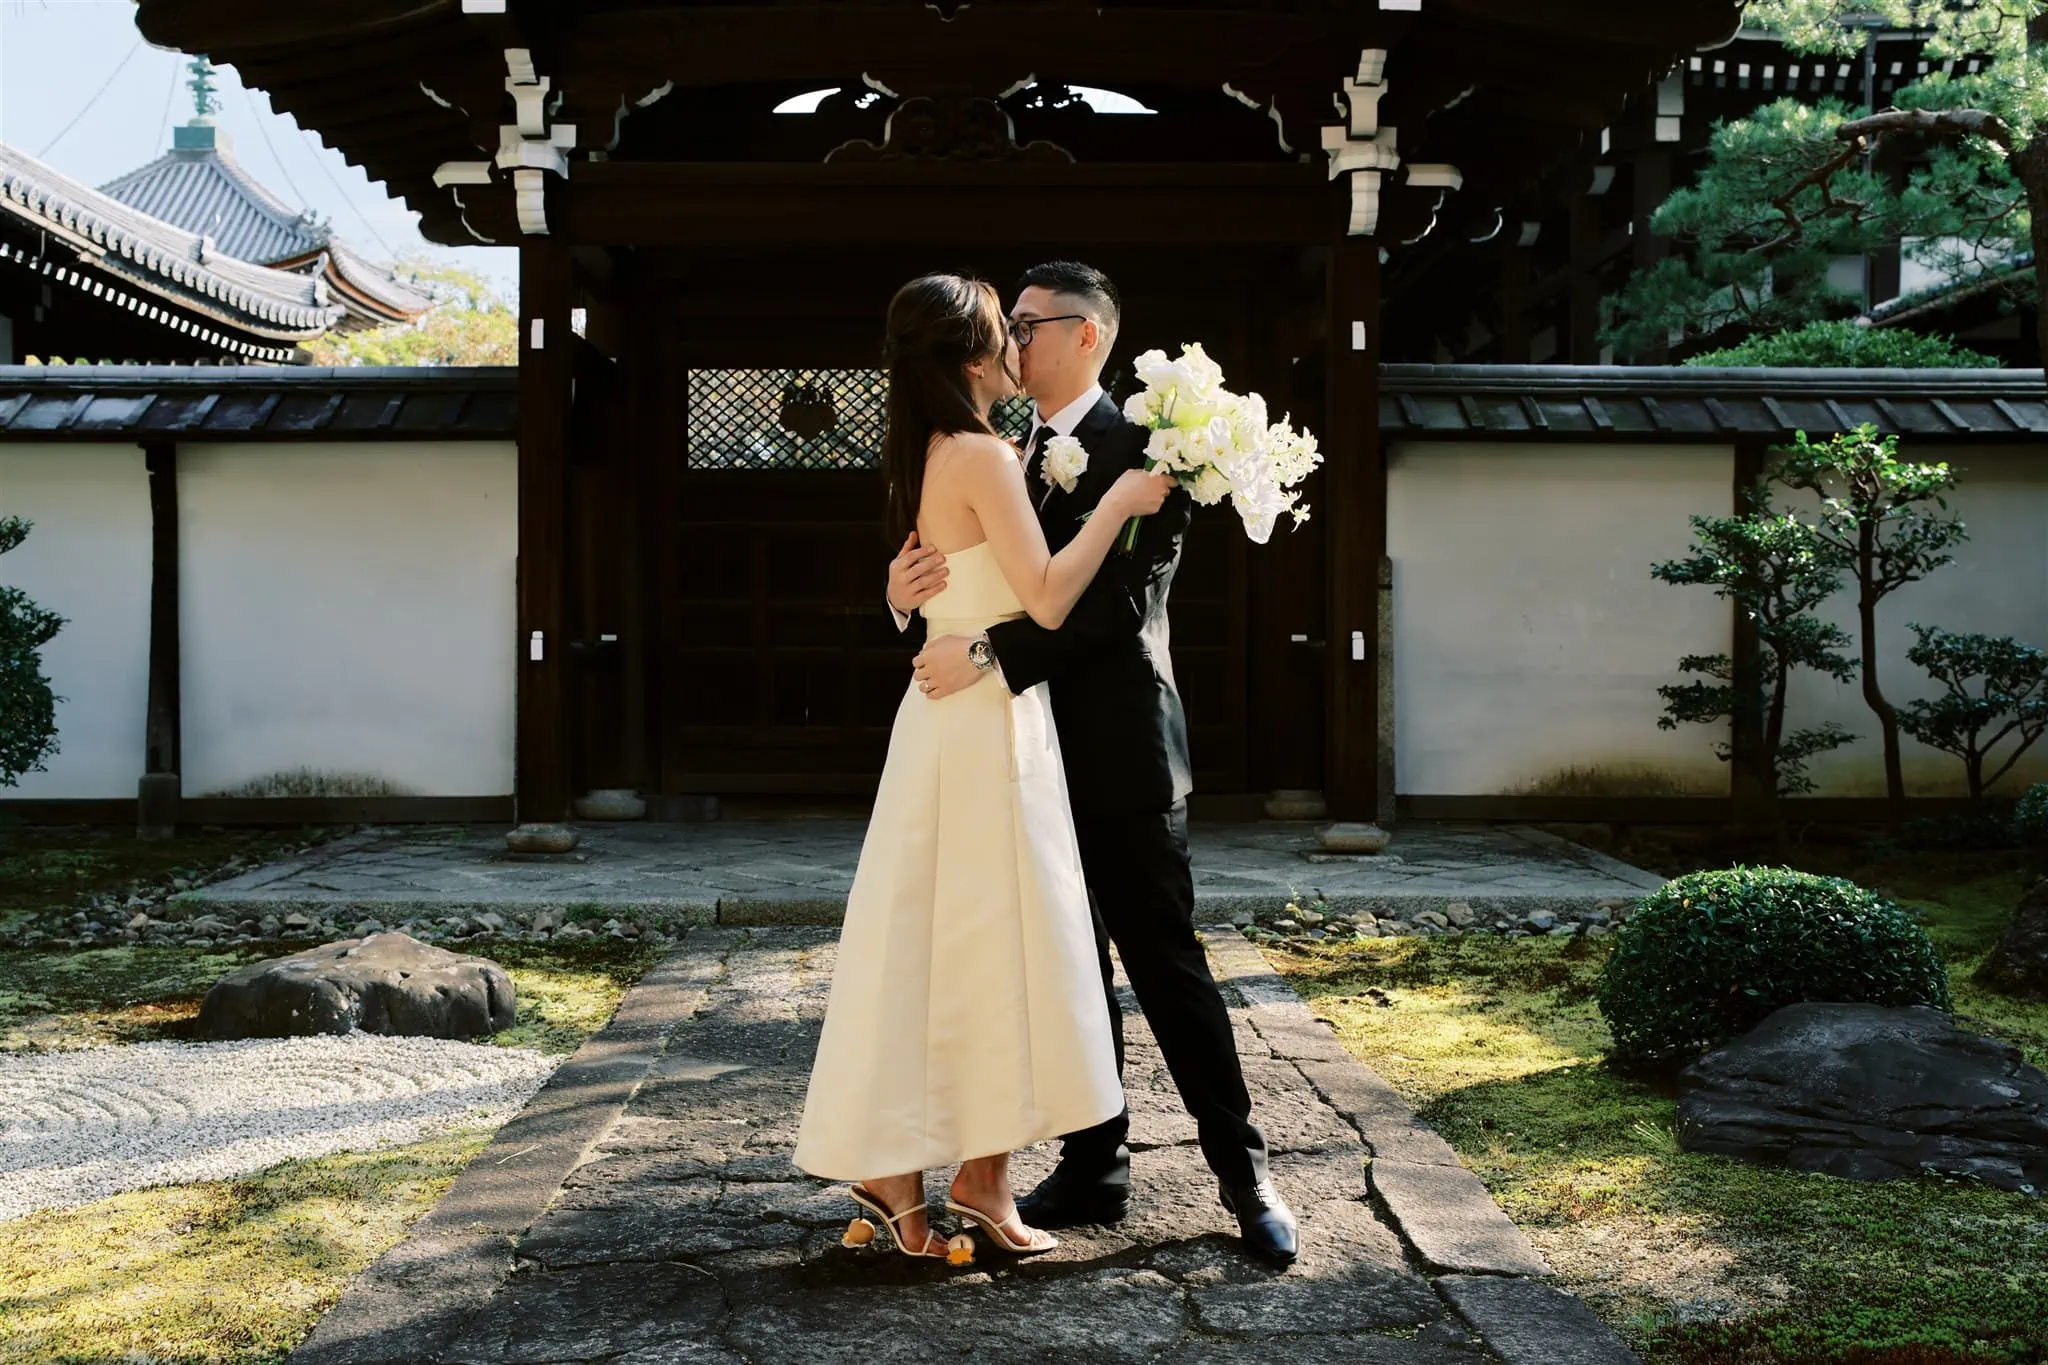 Kyoto Tokyo Japan Elopement Wedding Photographer, Planner & Videographer | A blissful bride and groom embracing in front of a stunning Japanese pagoda, capturing the essence of their intimate elopement in Japan.